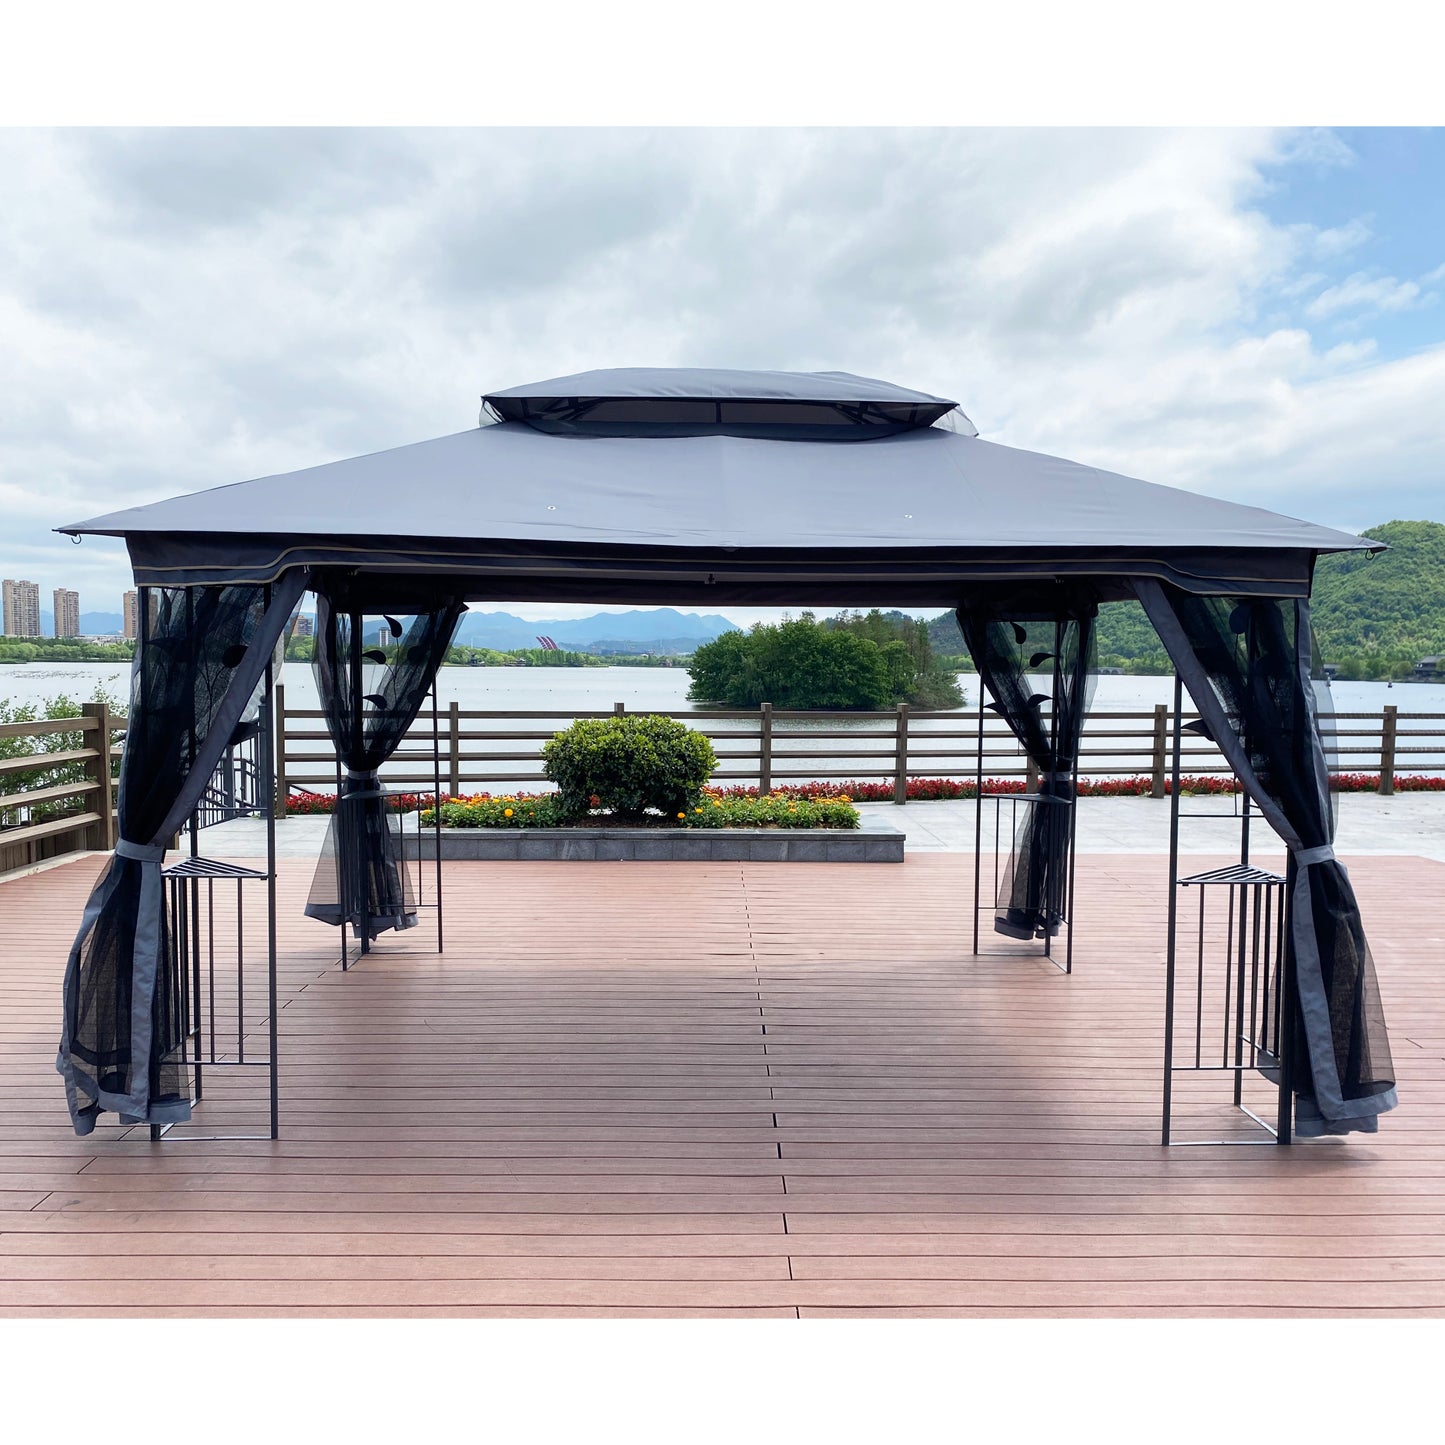 13x10 Outdoor Patio Gazebo Canopy Tent With Ventilated Double Roof And Mosquito net (Detachable Mesh Screen On All Sides),Suitable for Lawn, Garden, Backyard and Deck, Gray Top